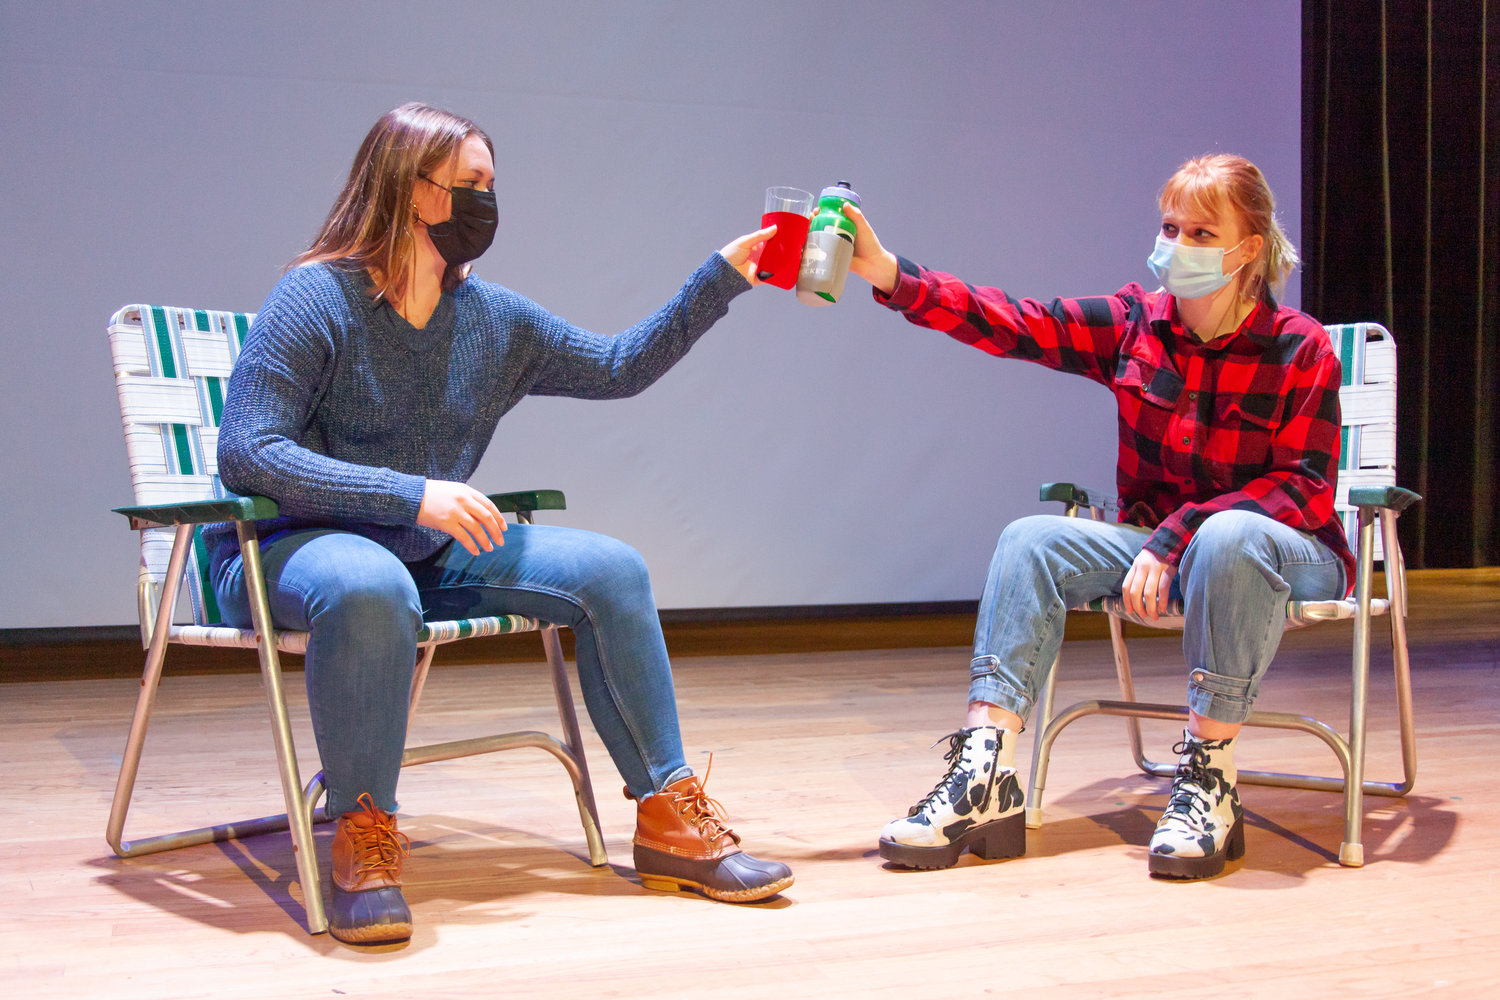 Natalie Mack and Stella Glowacki on stage during dress rehearsal for the Nantucket High School Drama Club’s production of “Almost, Maine,” opening Friday and running through Sunday.